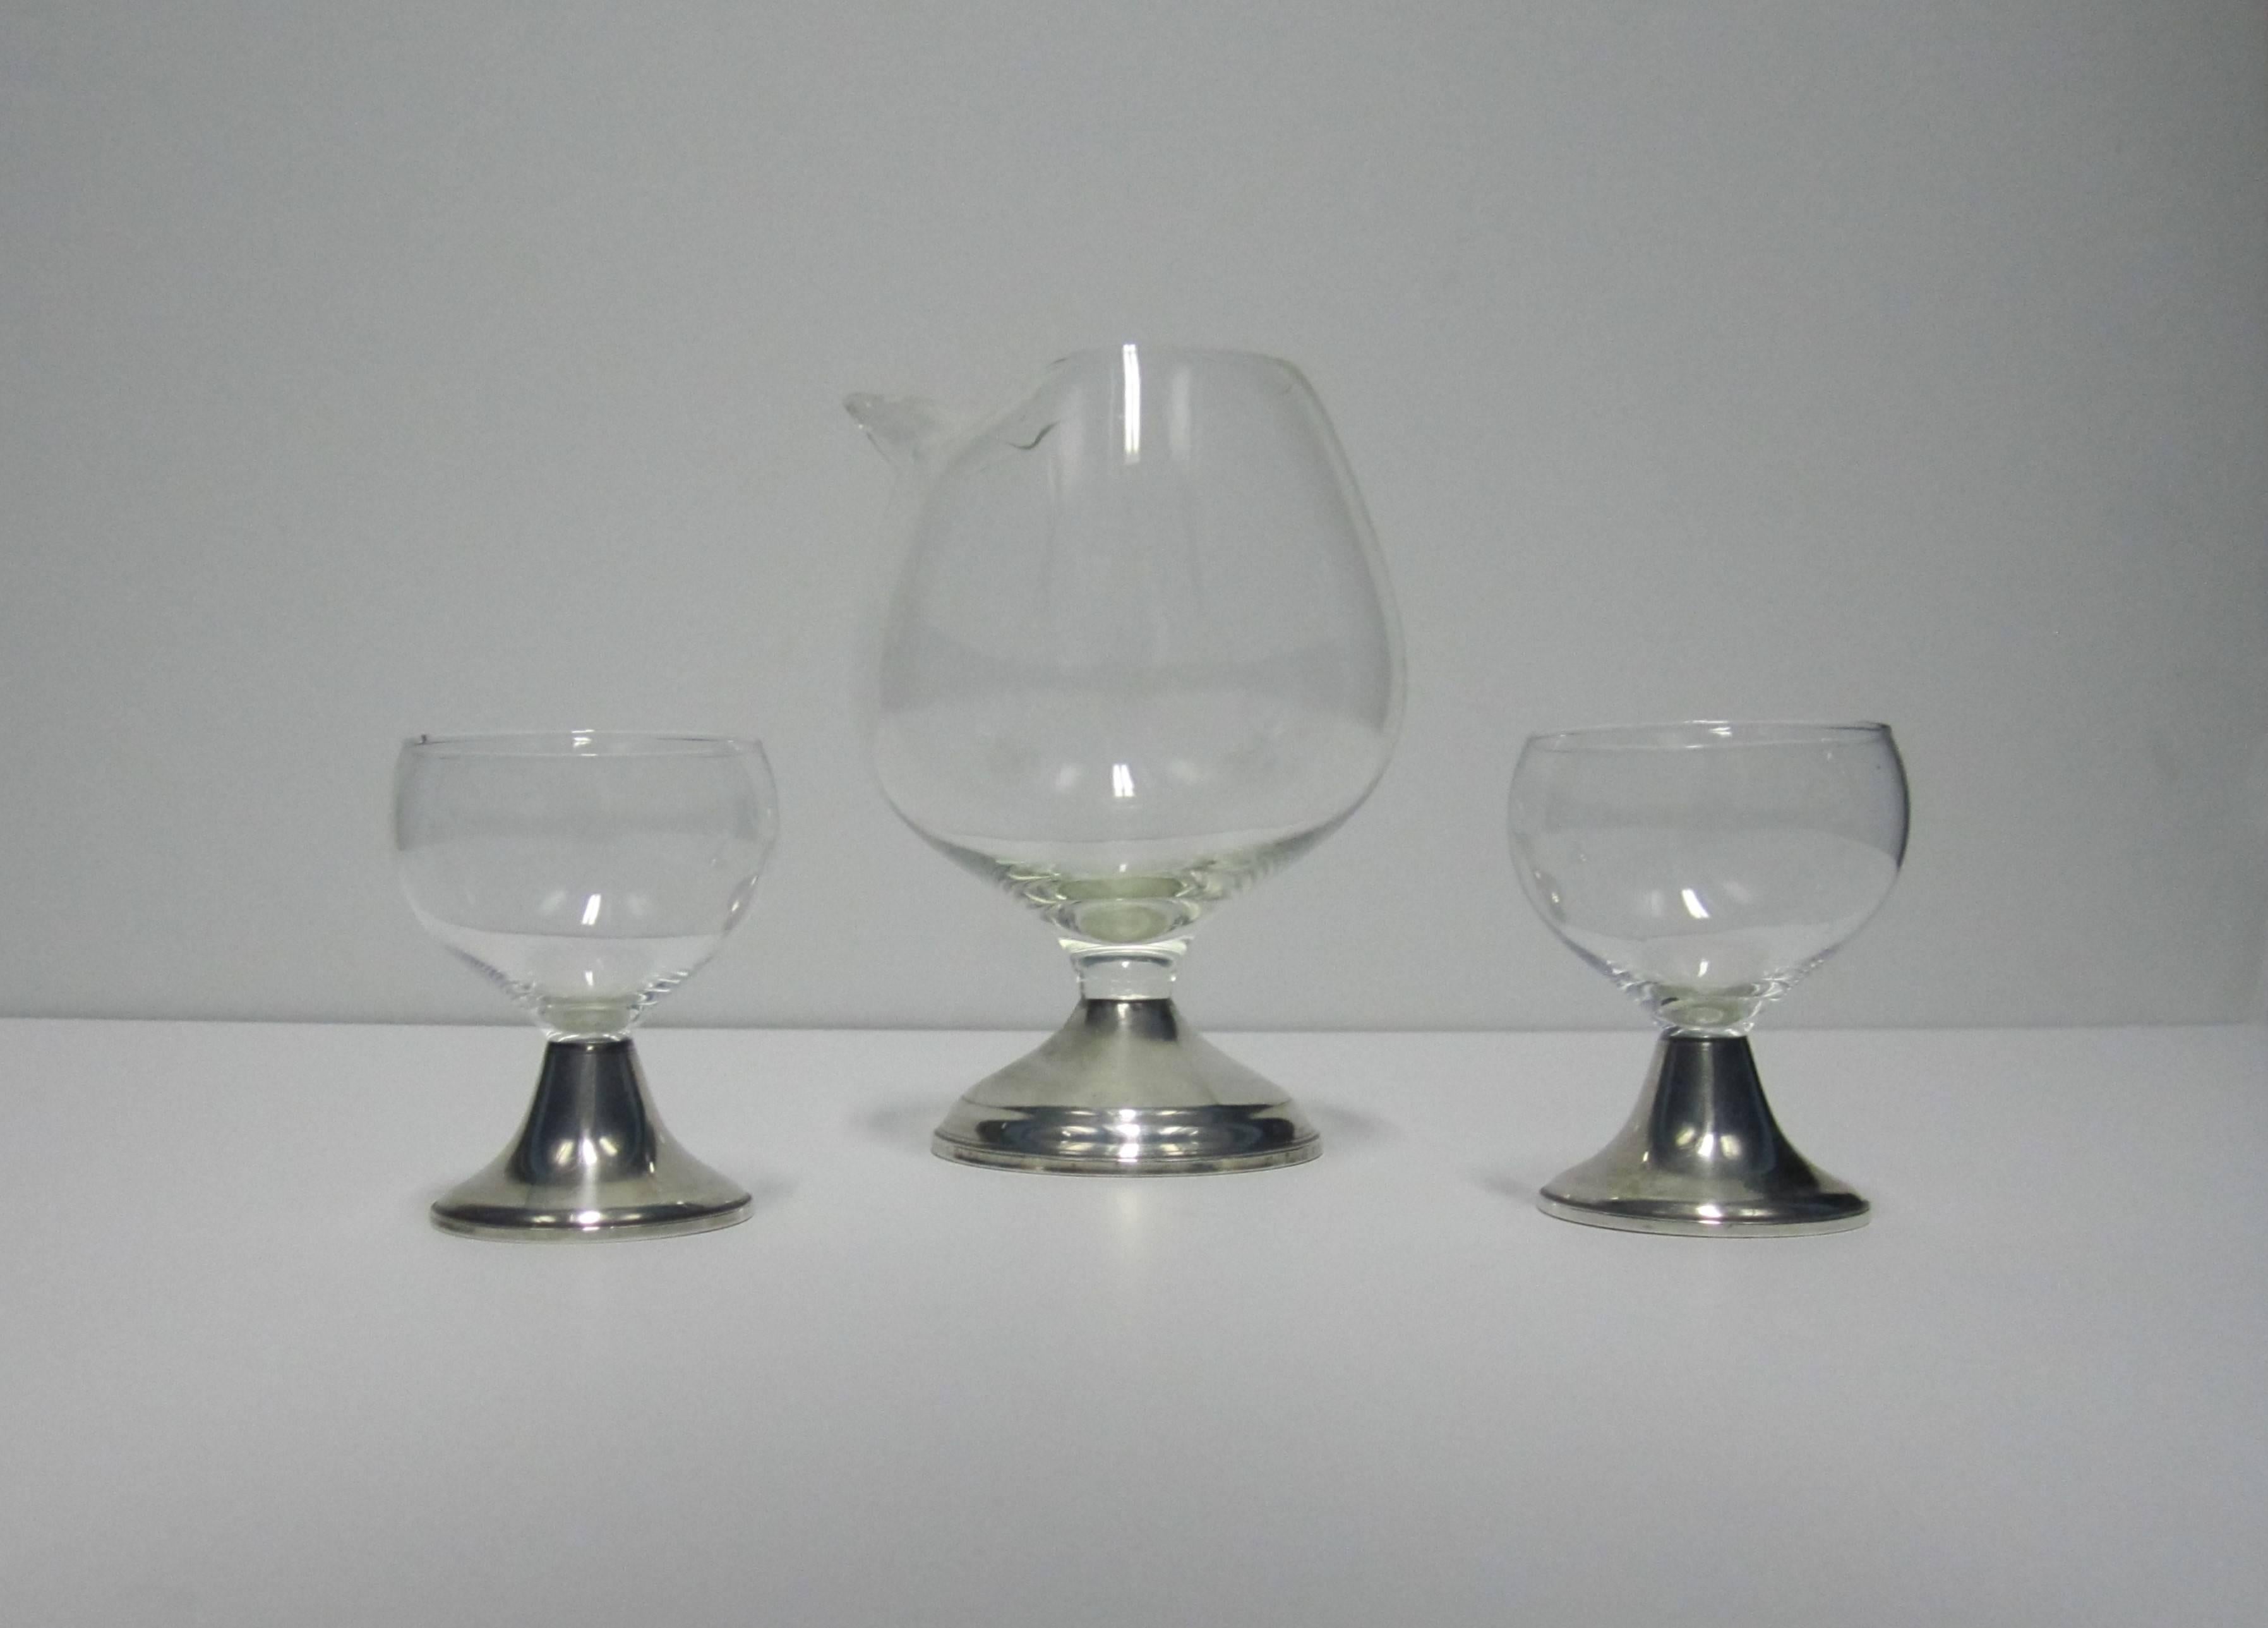 A beautiful and elegant Mid-Century sterling silver and blown-glass spirits or liquor decanter and two finely proportioned glasses, all by Duchin. Decanter and two glasses have sterling silver bases (with marker's mark and sterling silver marking